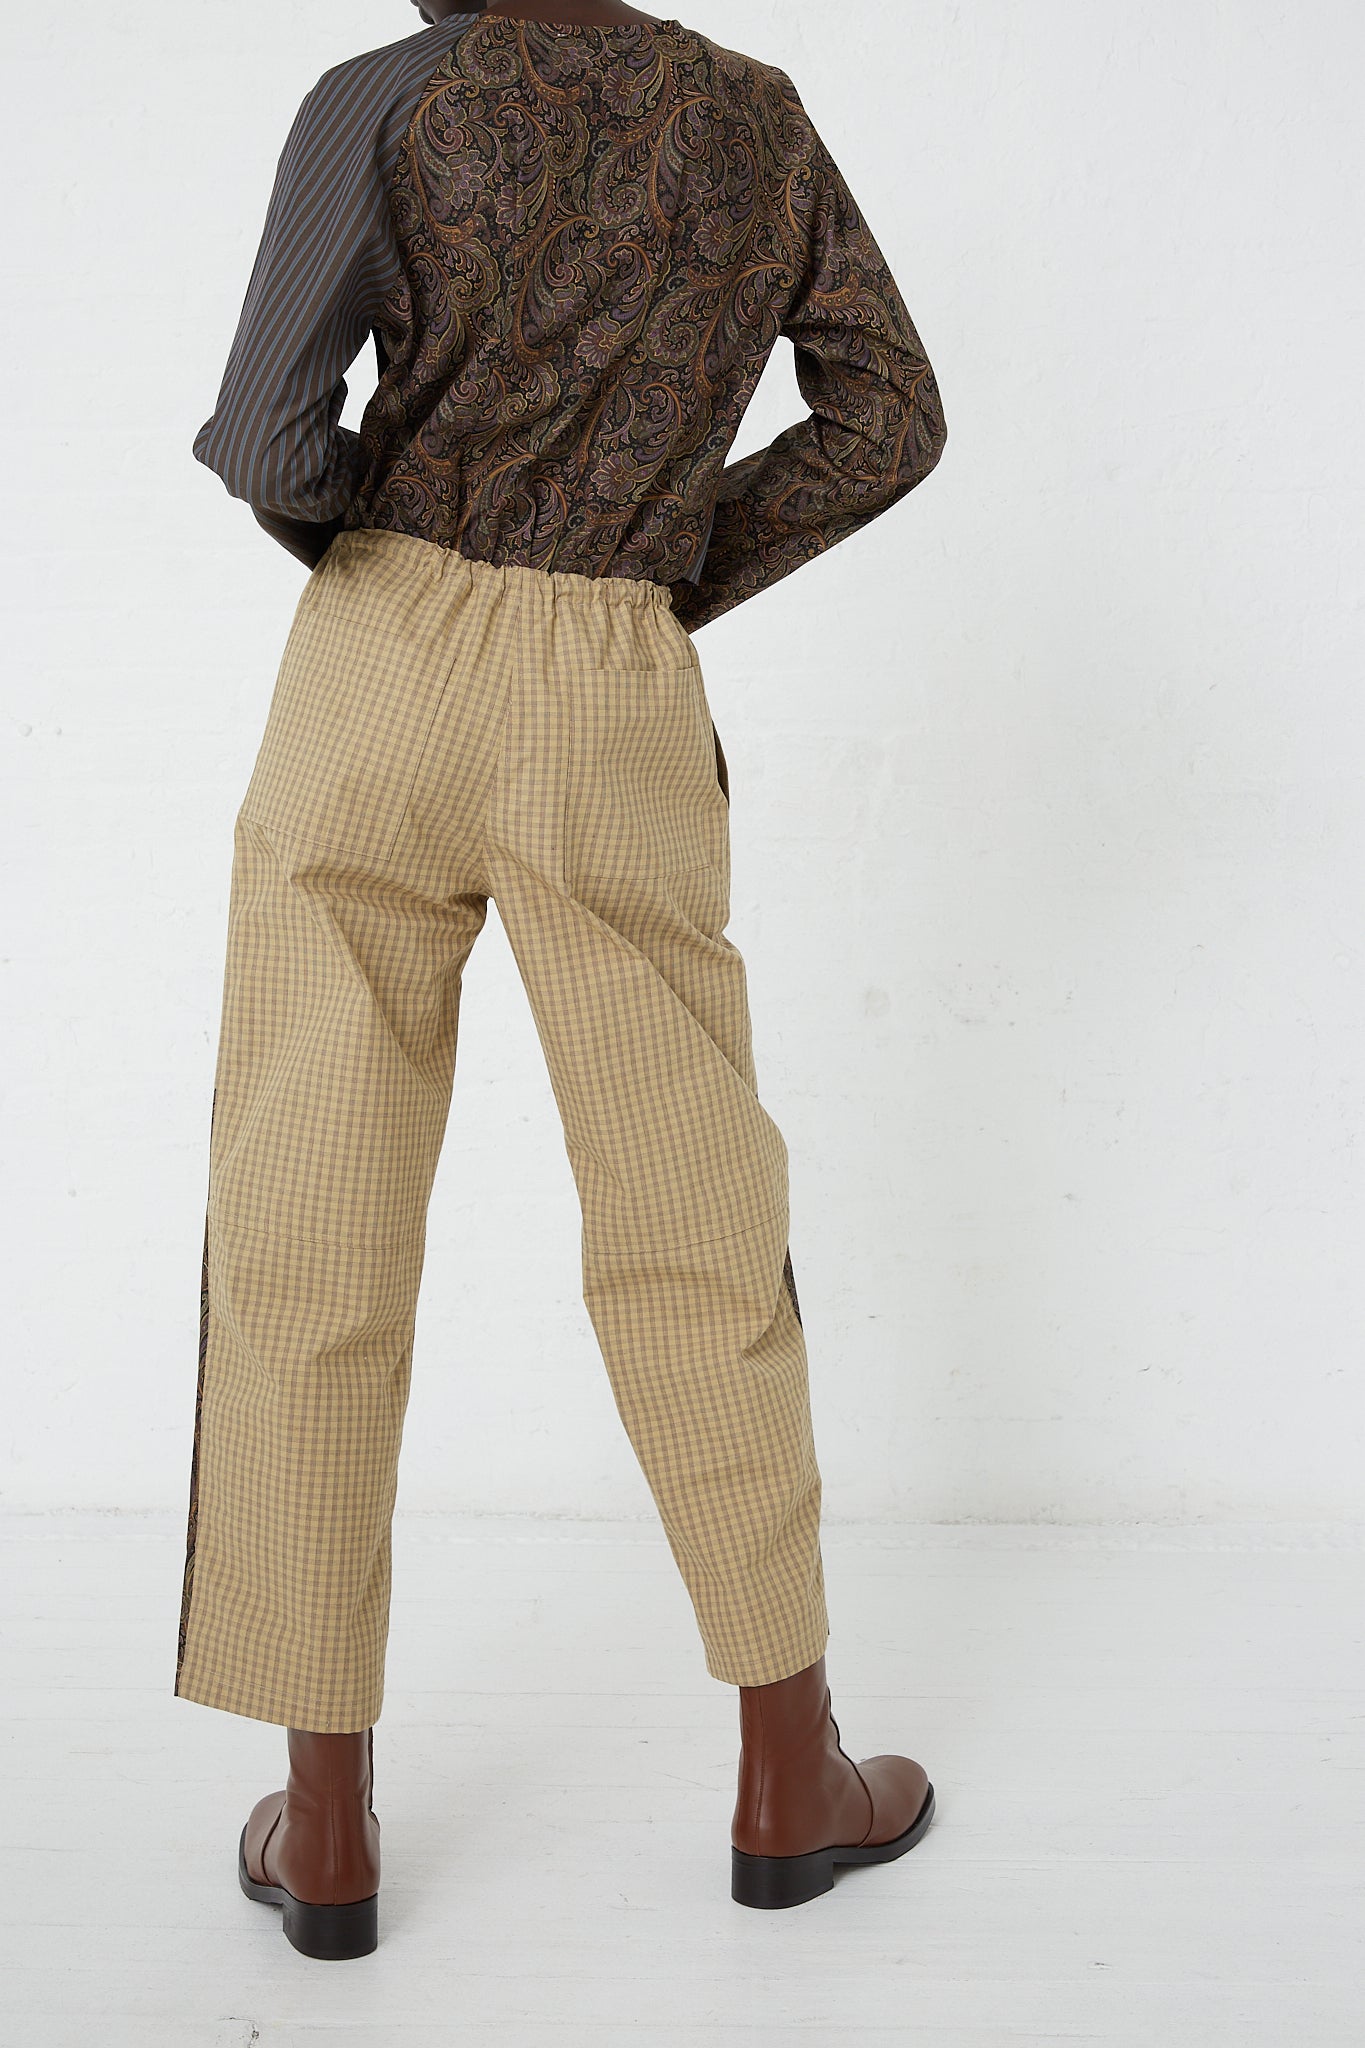 The back of a woman wearing SC103 striped pants and a paisley top, effortlessly accessorized with an adjustable waist belt for added style and comfort.